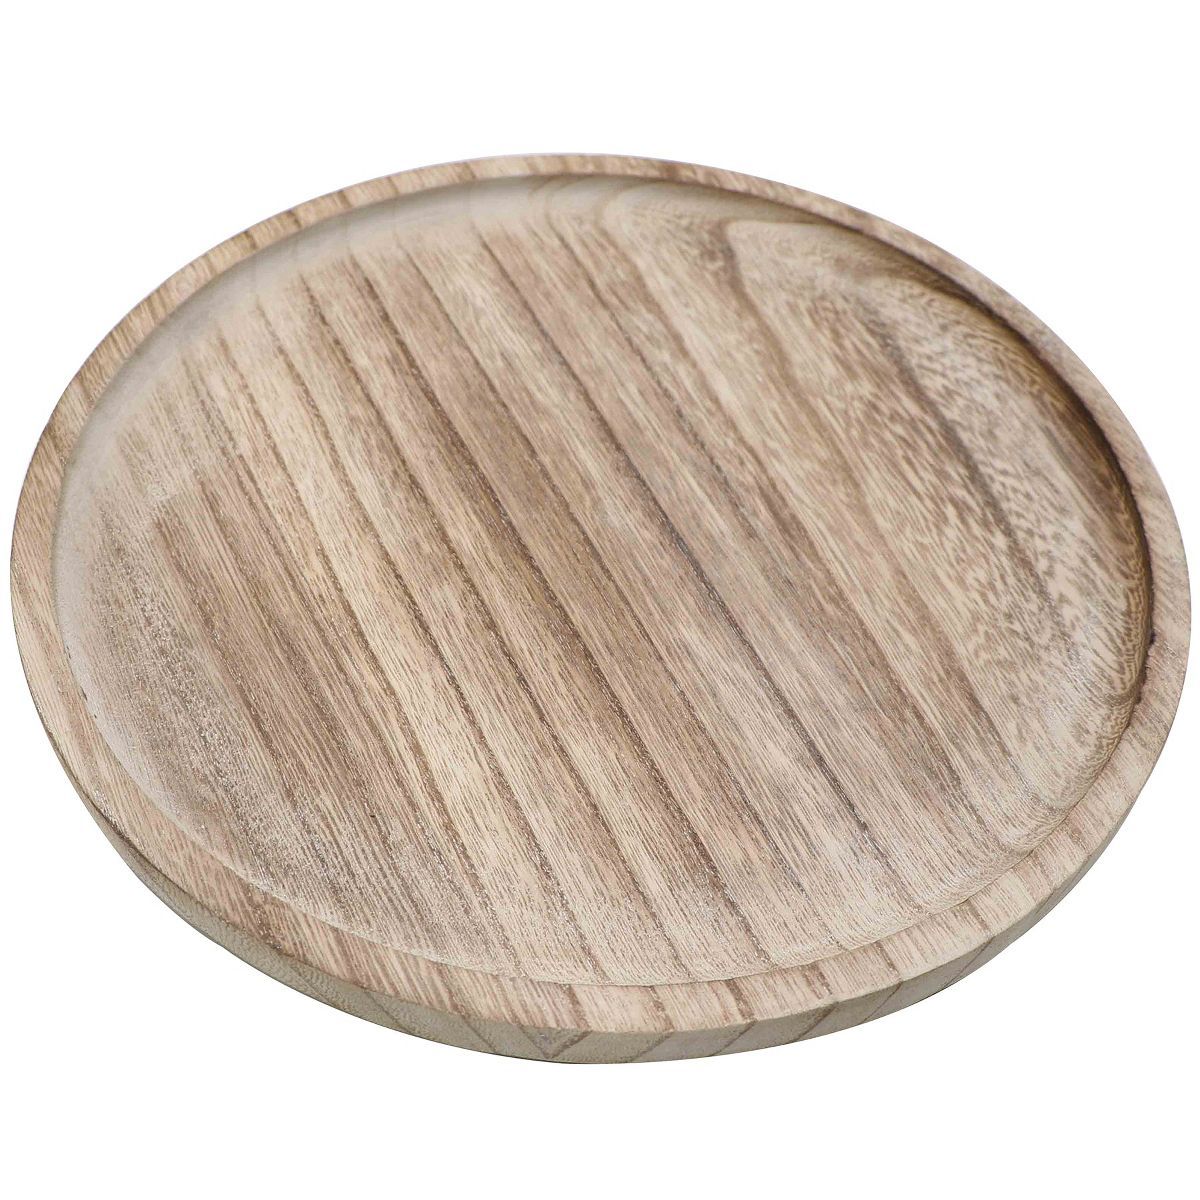 Sweet Water Decor Large Rustic Round Wood Tray - 10x10" | Target